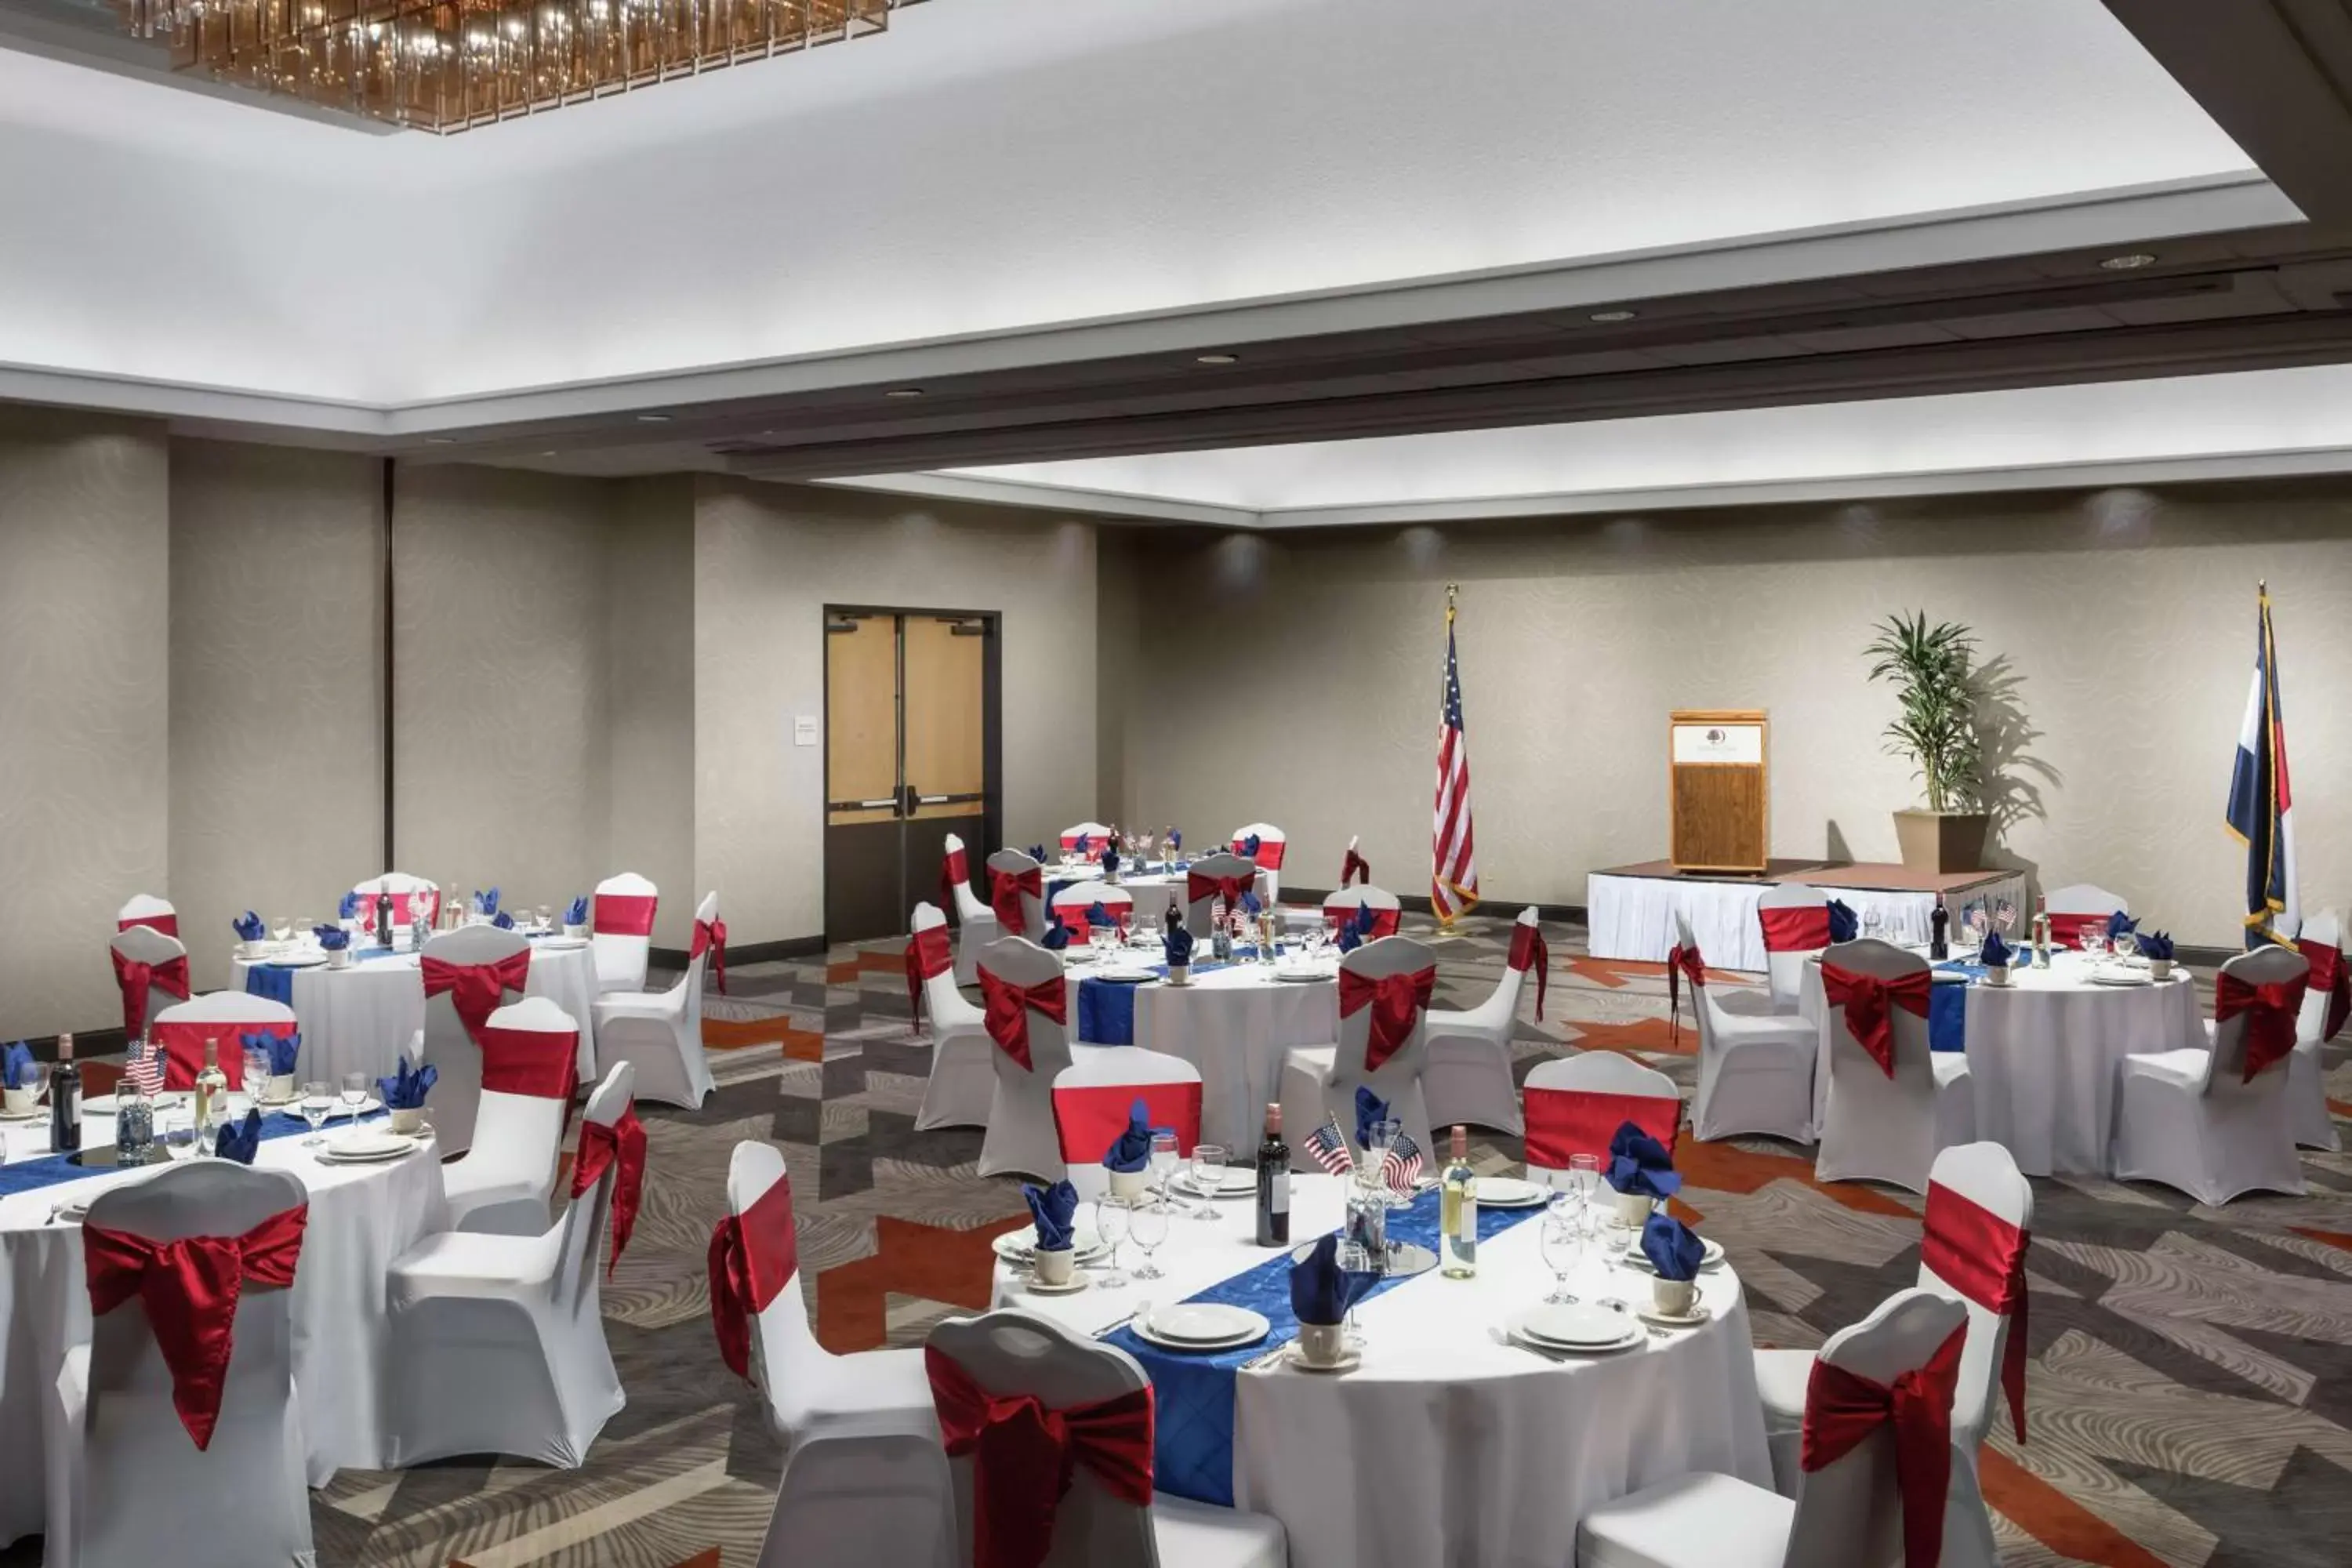 Meeting/conference room, Banquet Facilities in DoubleTree by Hilton Colorado Springs